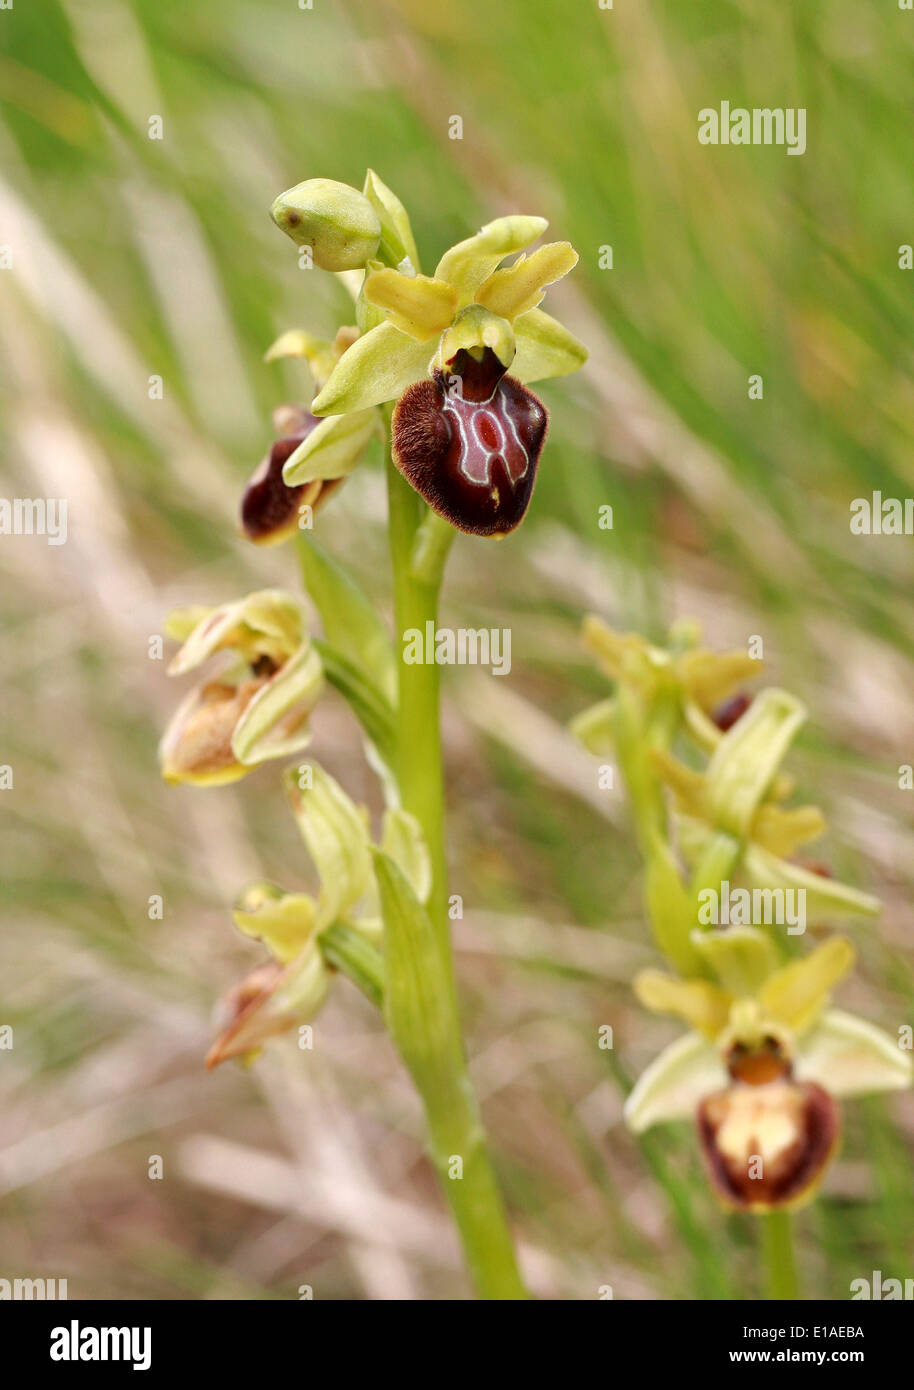 Early Spider Orchids, Ophrys sphegodes, Orchidaceae. Samphire Hoe, Kent. British Wild Flower, UK. Stock Photo